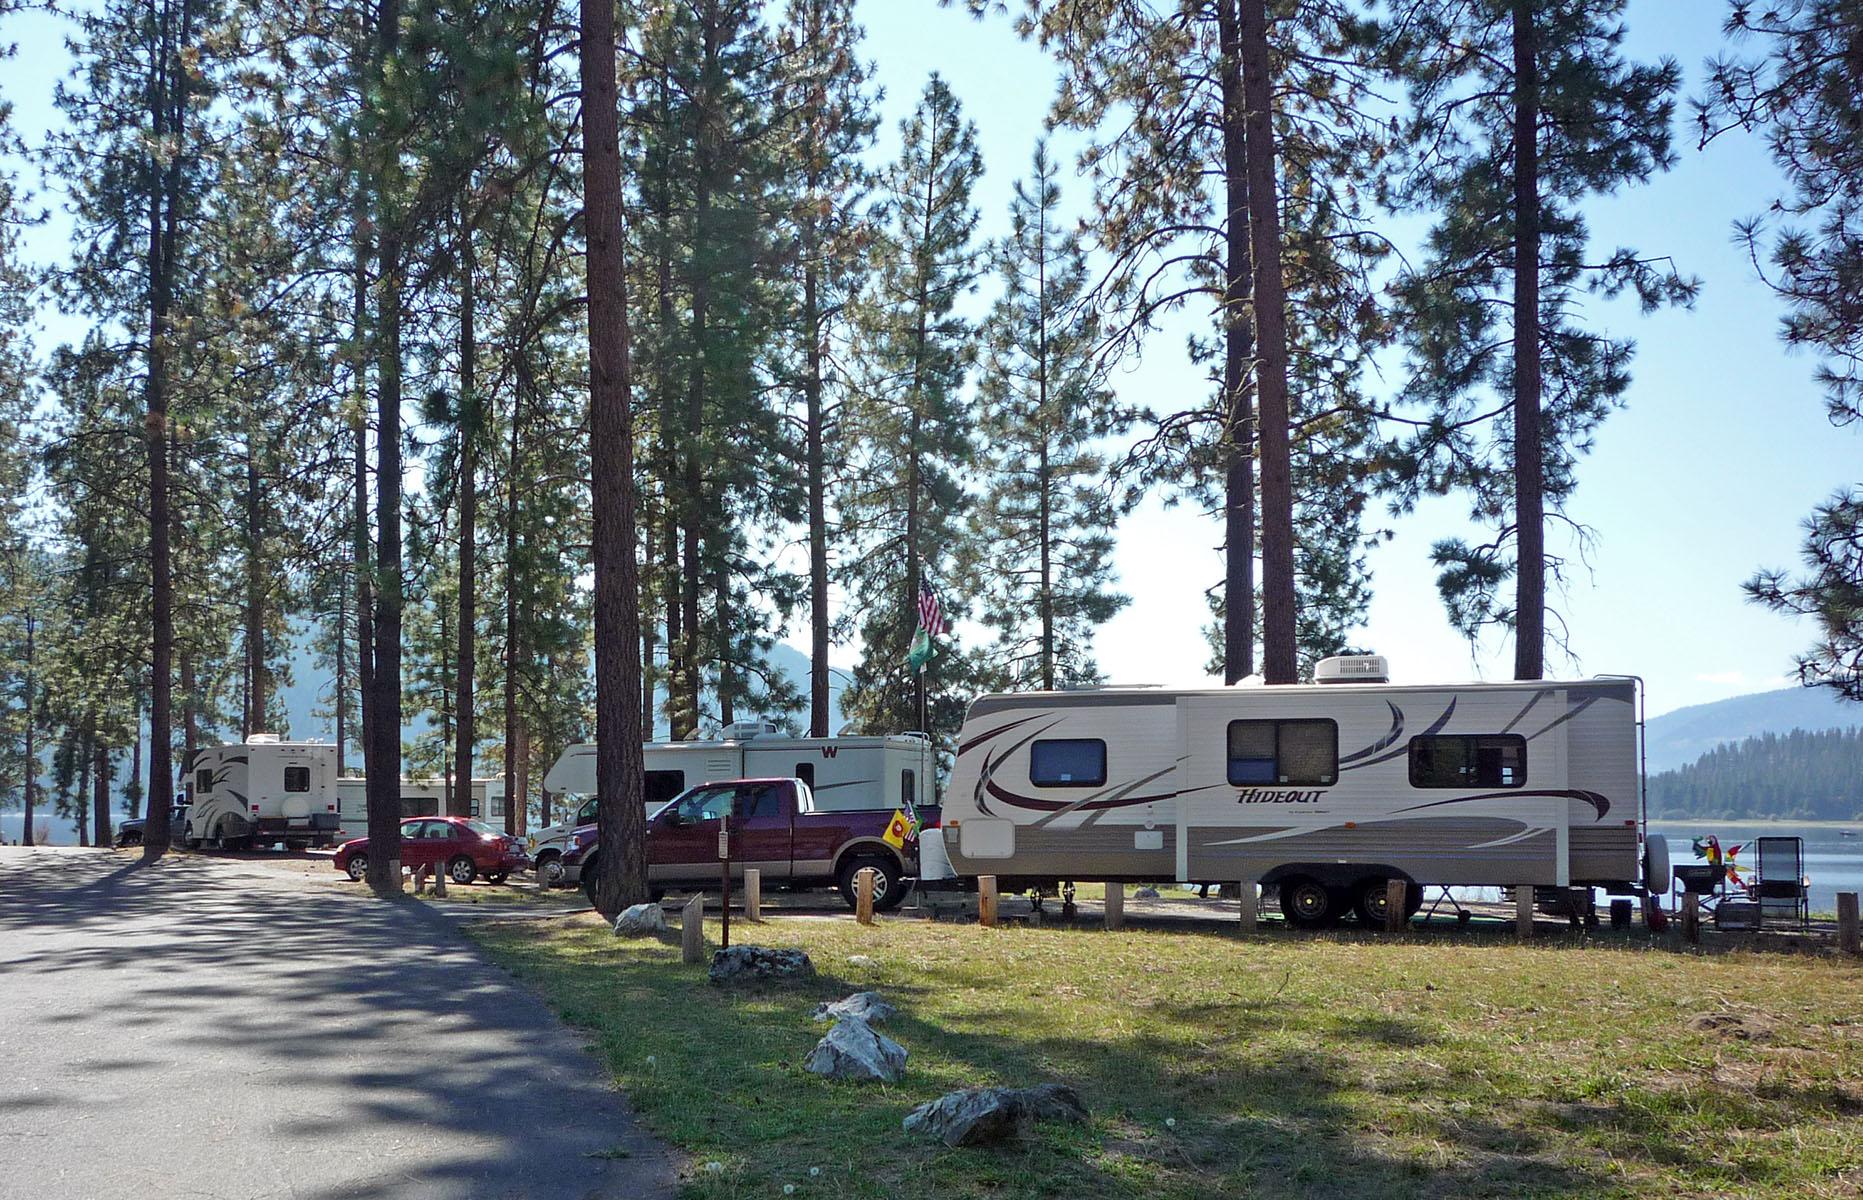 Large RV parked in campsite among ponderosa pine trees with other RVS in background